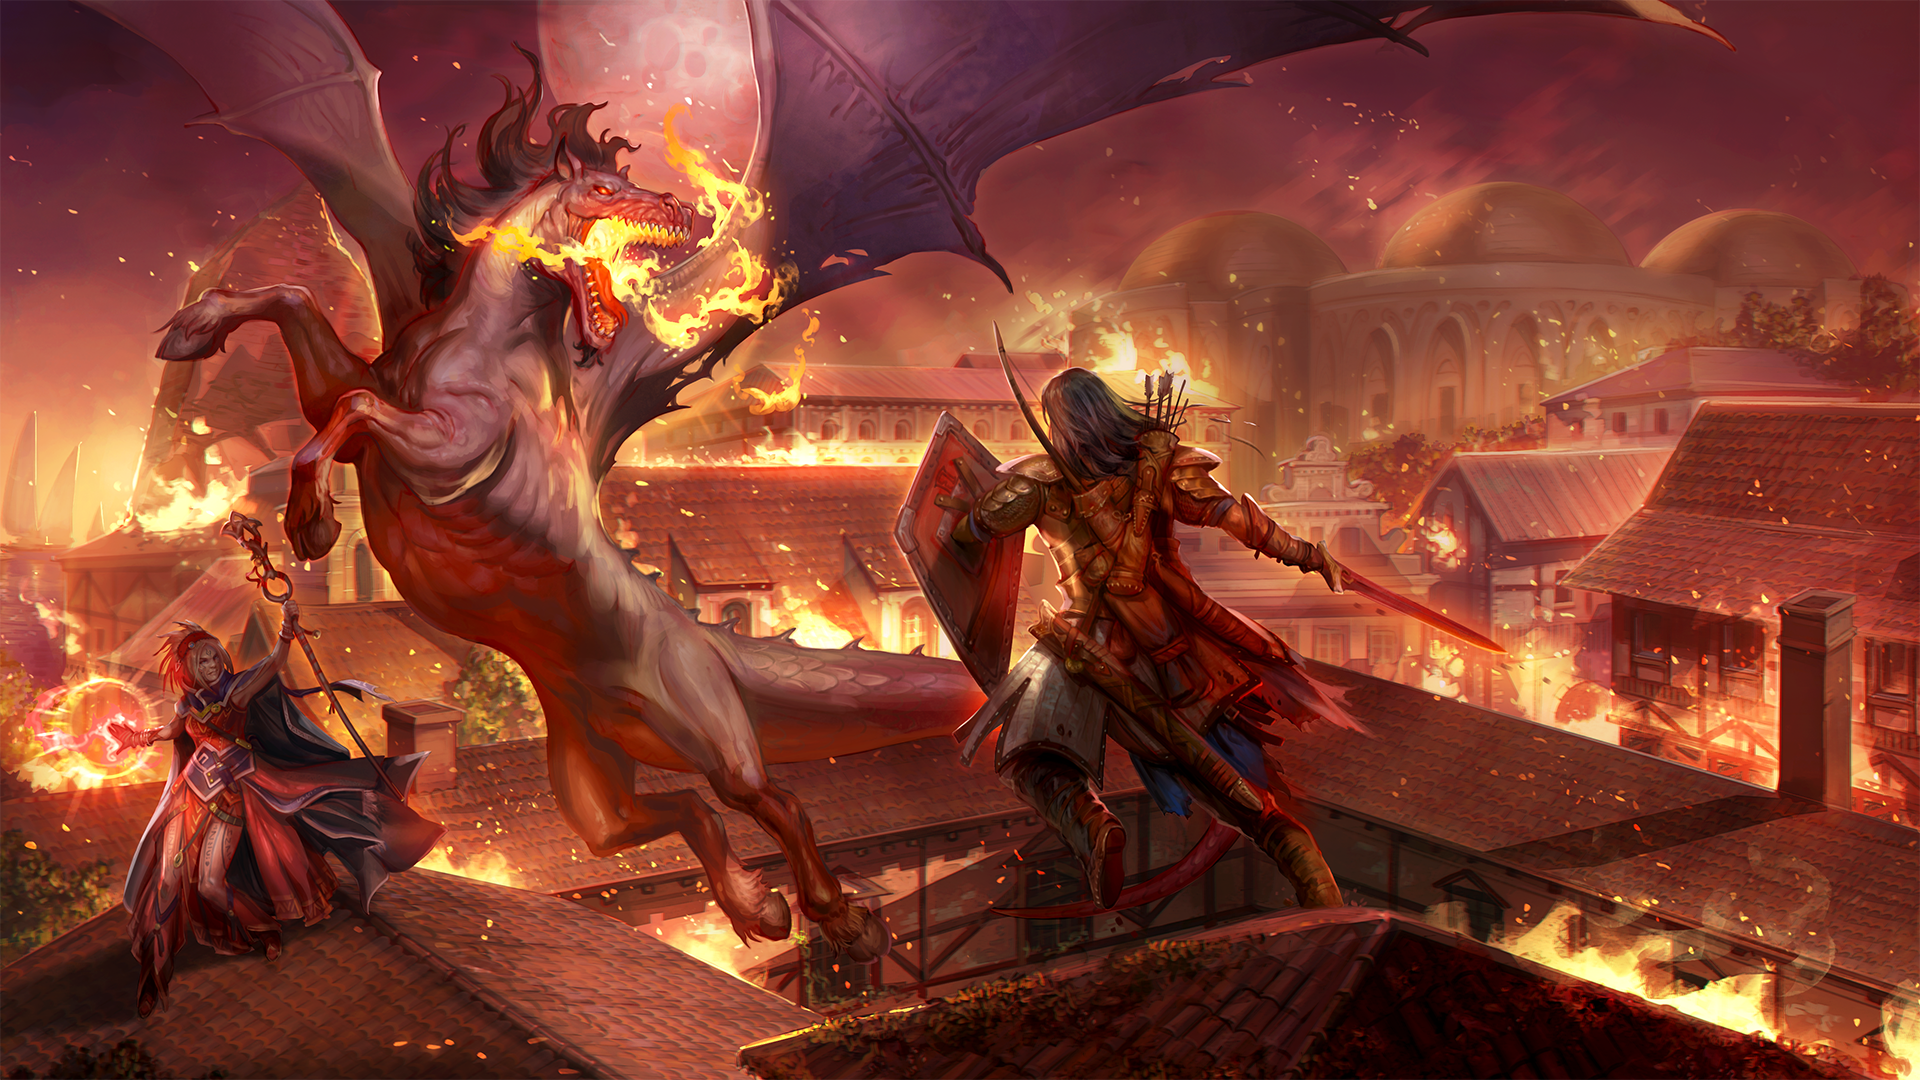 Pathfinder iconics, Seoni and Valeros, battling a winged, fire-breathing horse on the roof of a burning building